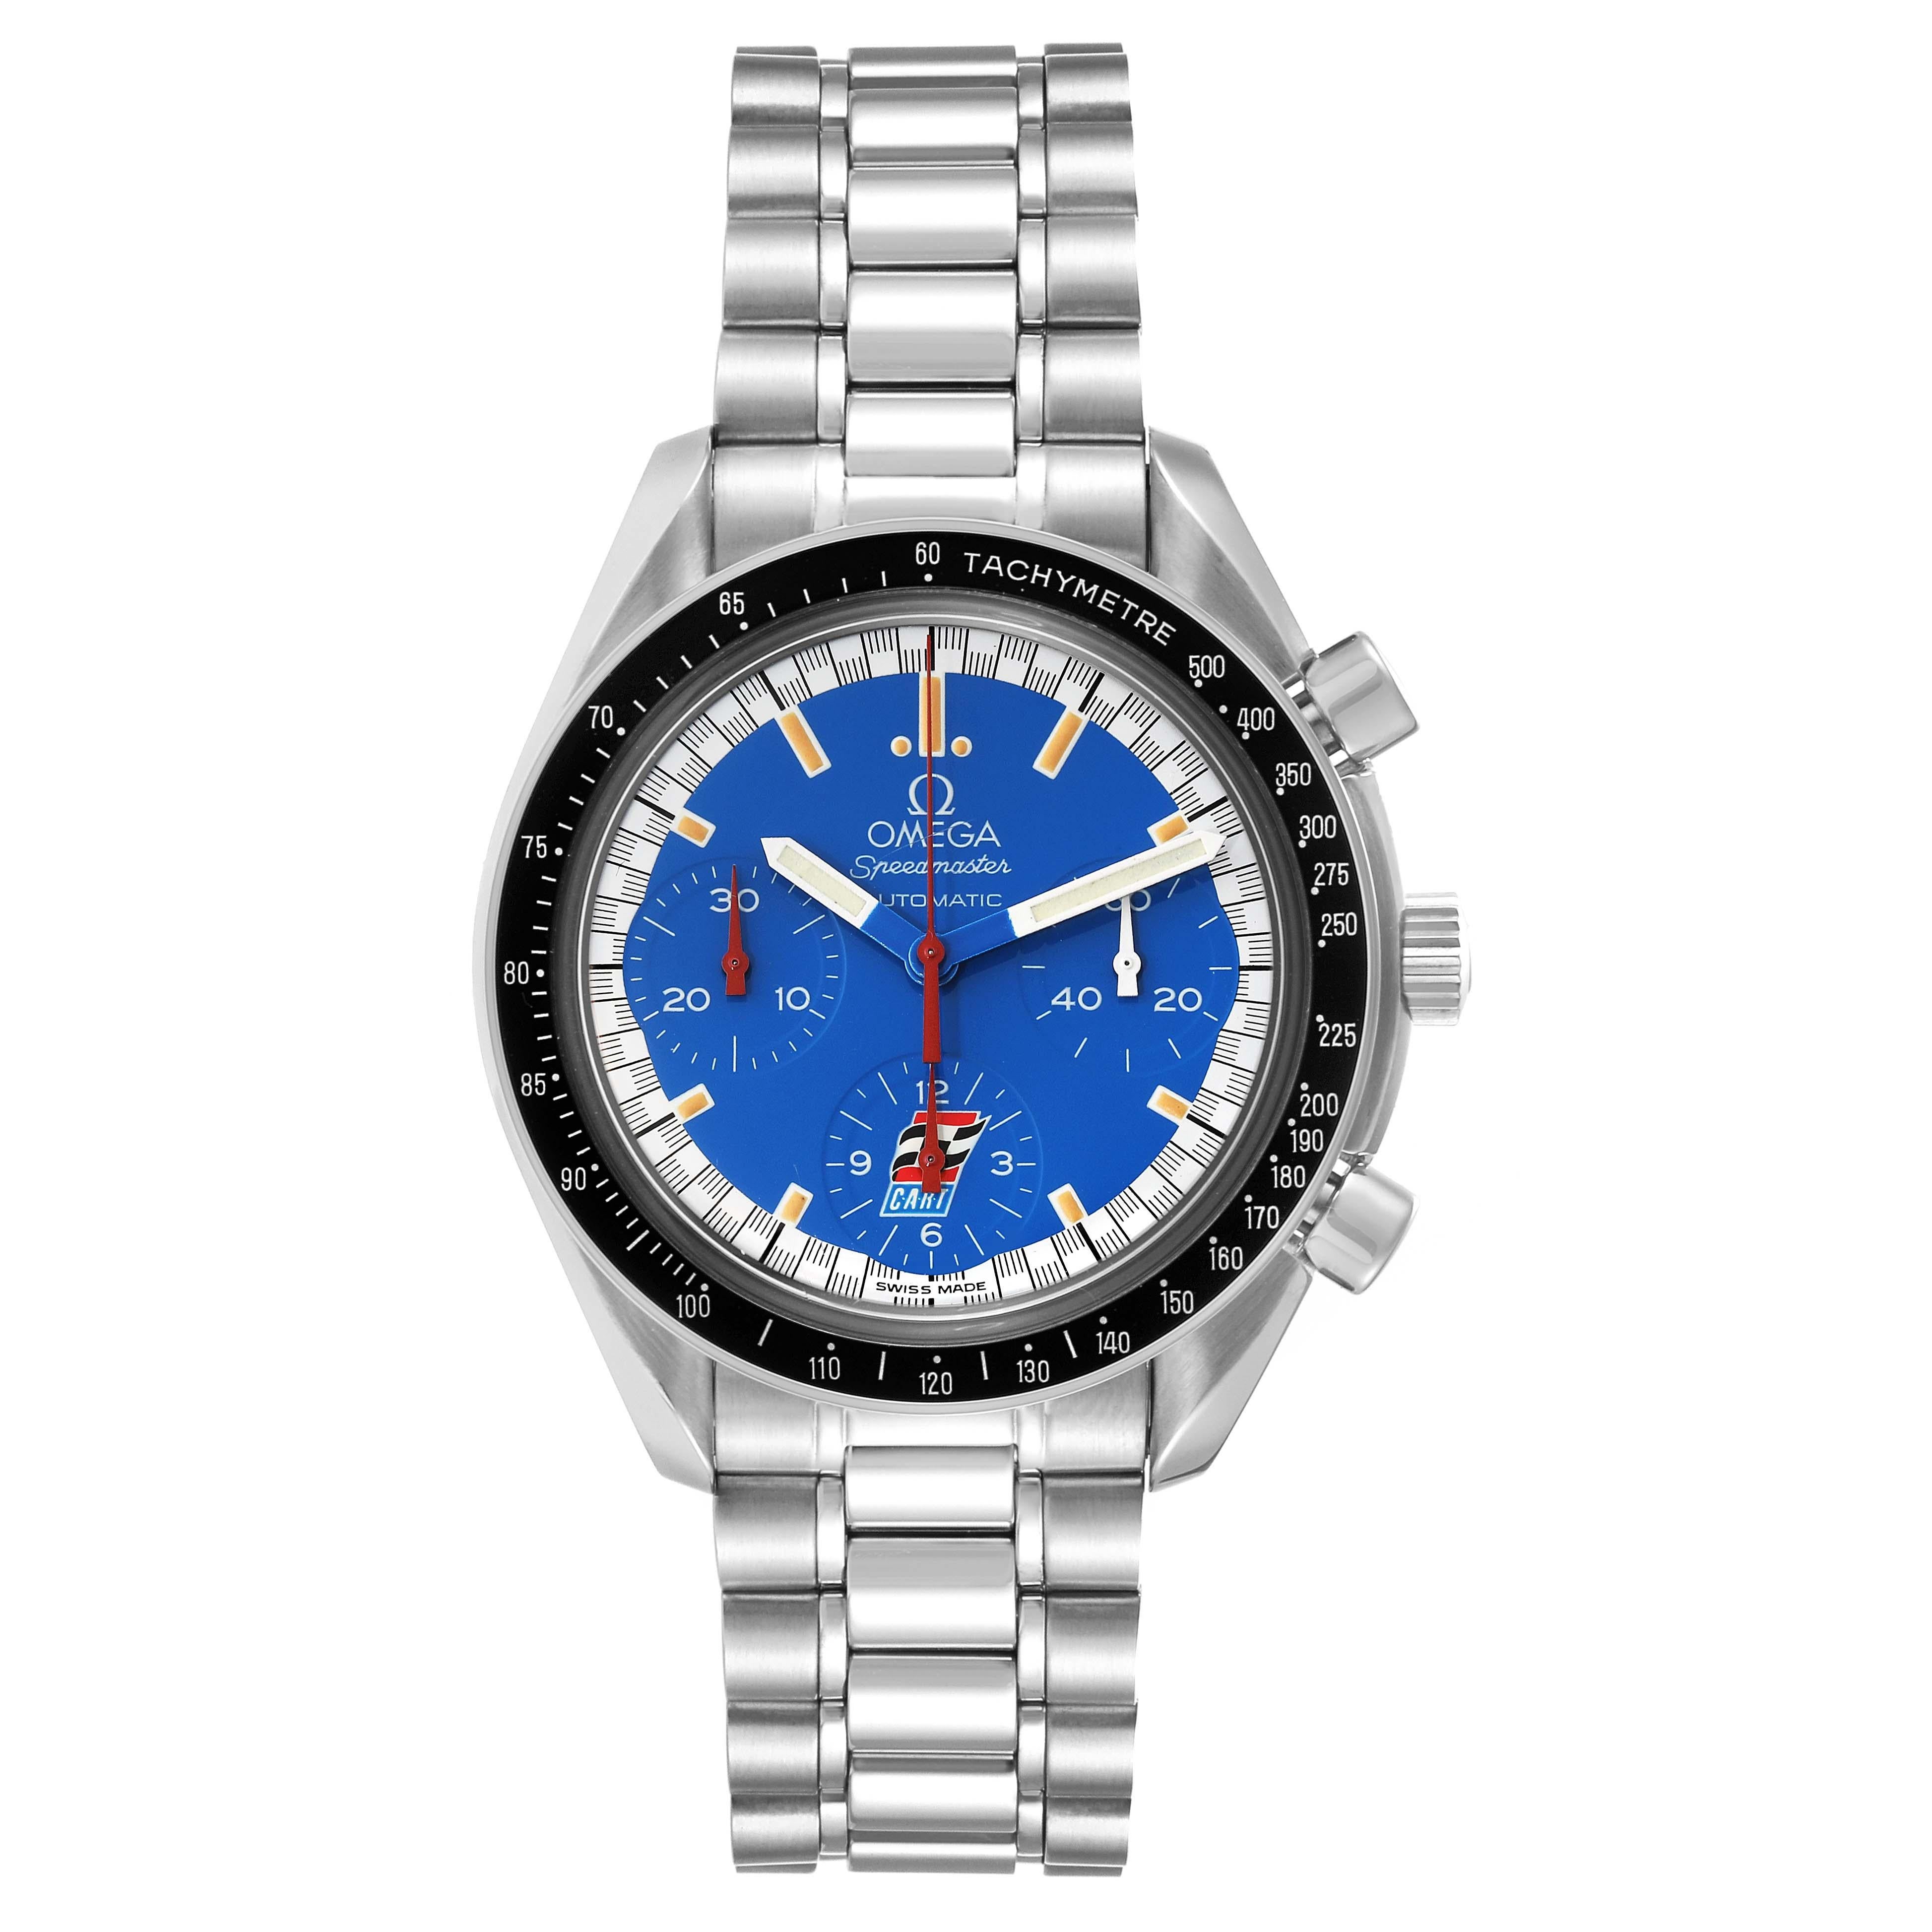 Omega Speedmaster Schumacher Blue Dial Automatic Steel Mens Watch 3510.80.00. Automatic self-winding chronograph movement. Stainless steel round case 39.0 mm in diameter. Black tachymeter bezel. Scratch-resistant sapphire crystal. Blue dial with